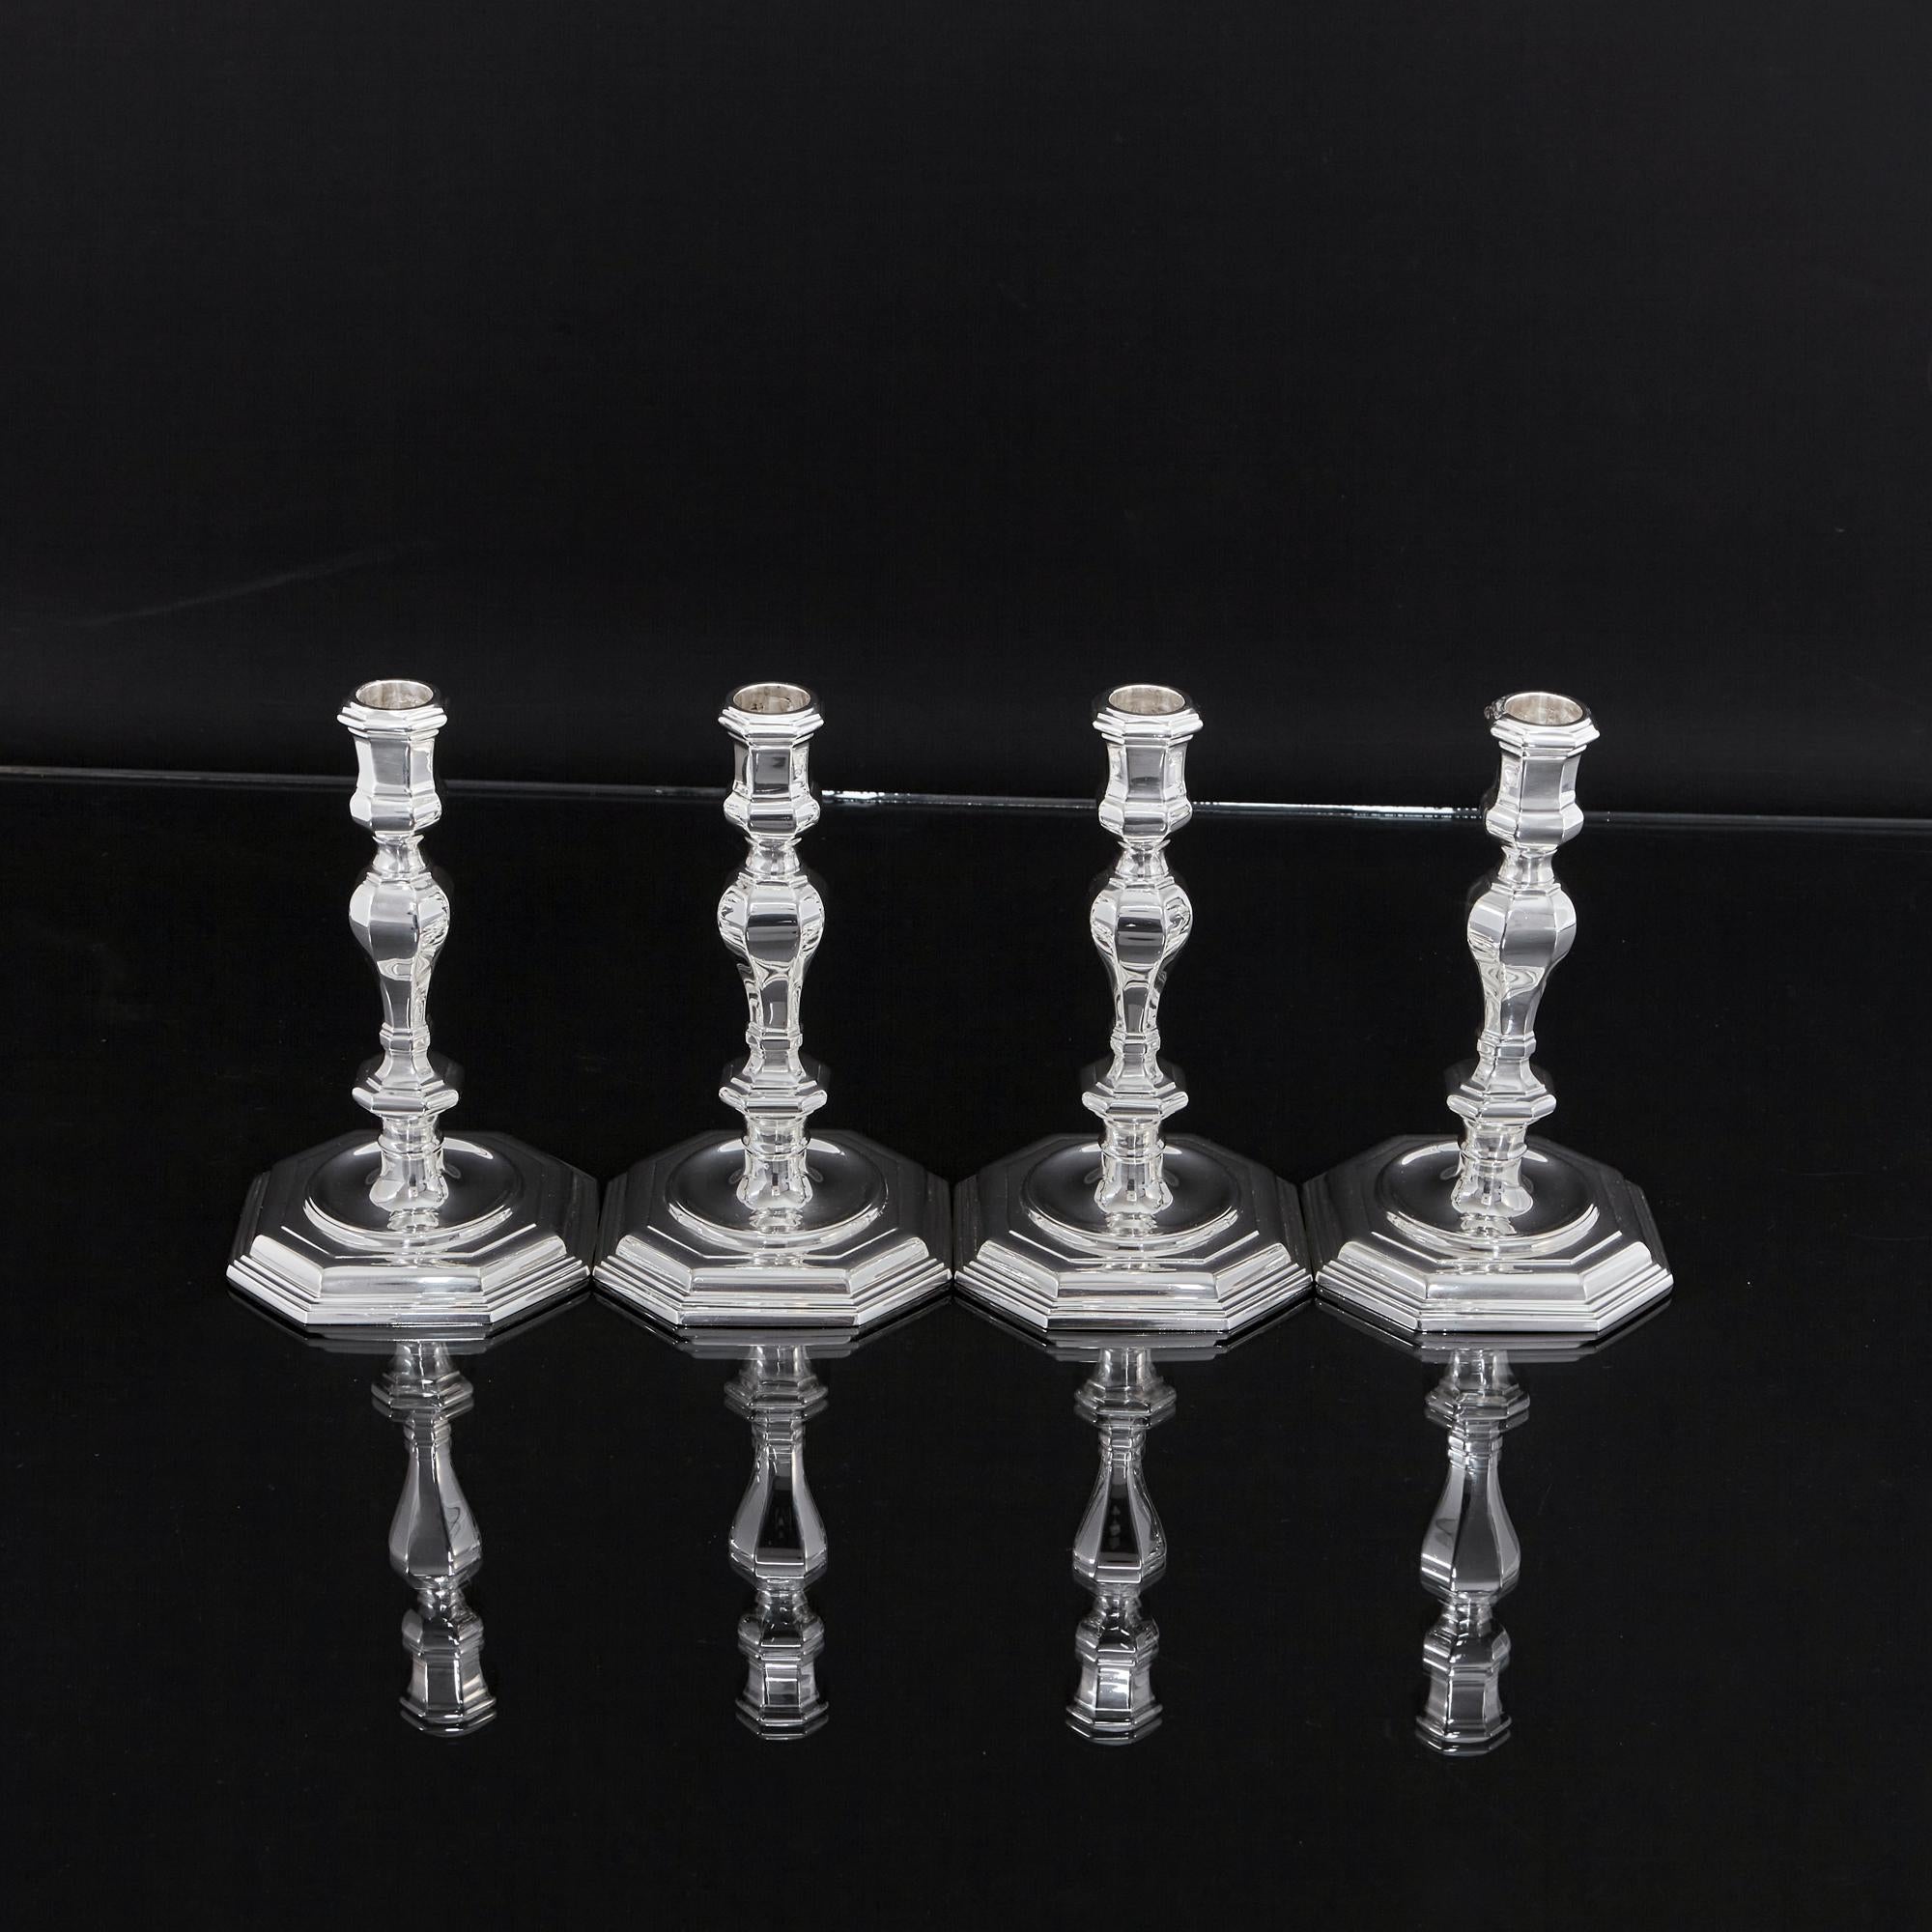 Set of four cast silver candlesticks in the style that would have been popular in the early 18th century, during George I's reign. This set of silver candlesticks is particularly well finished and of substantial weight. Design features include the